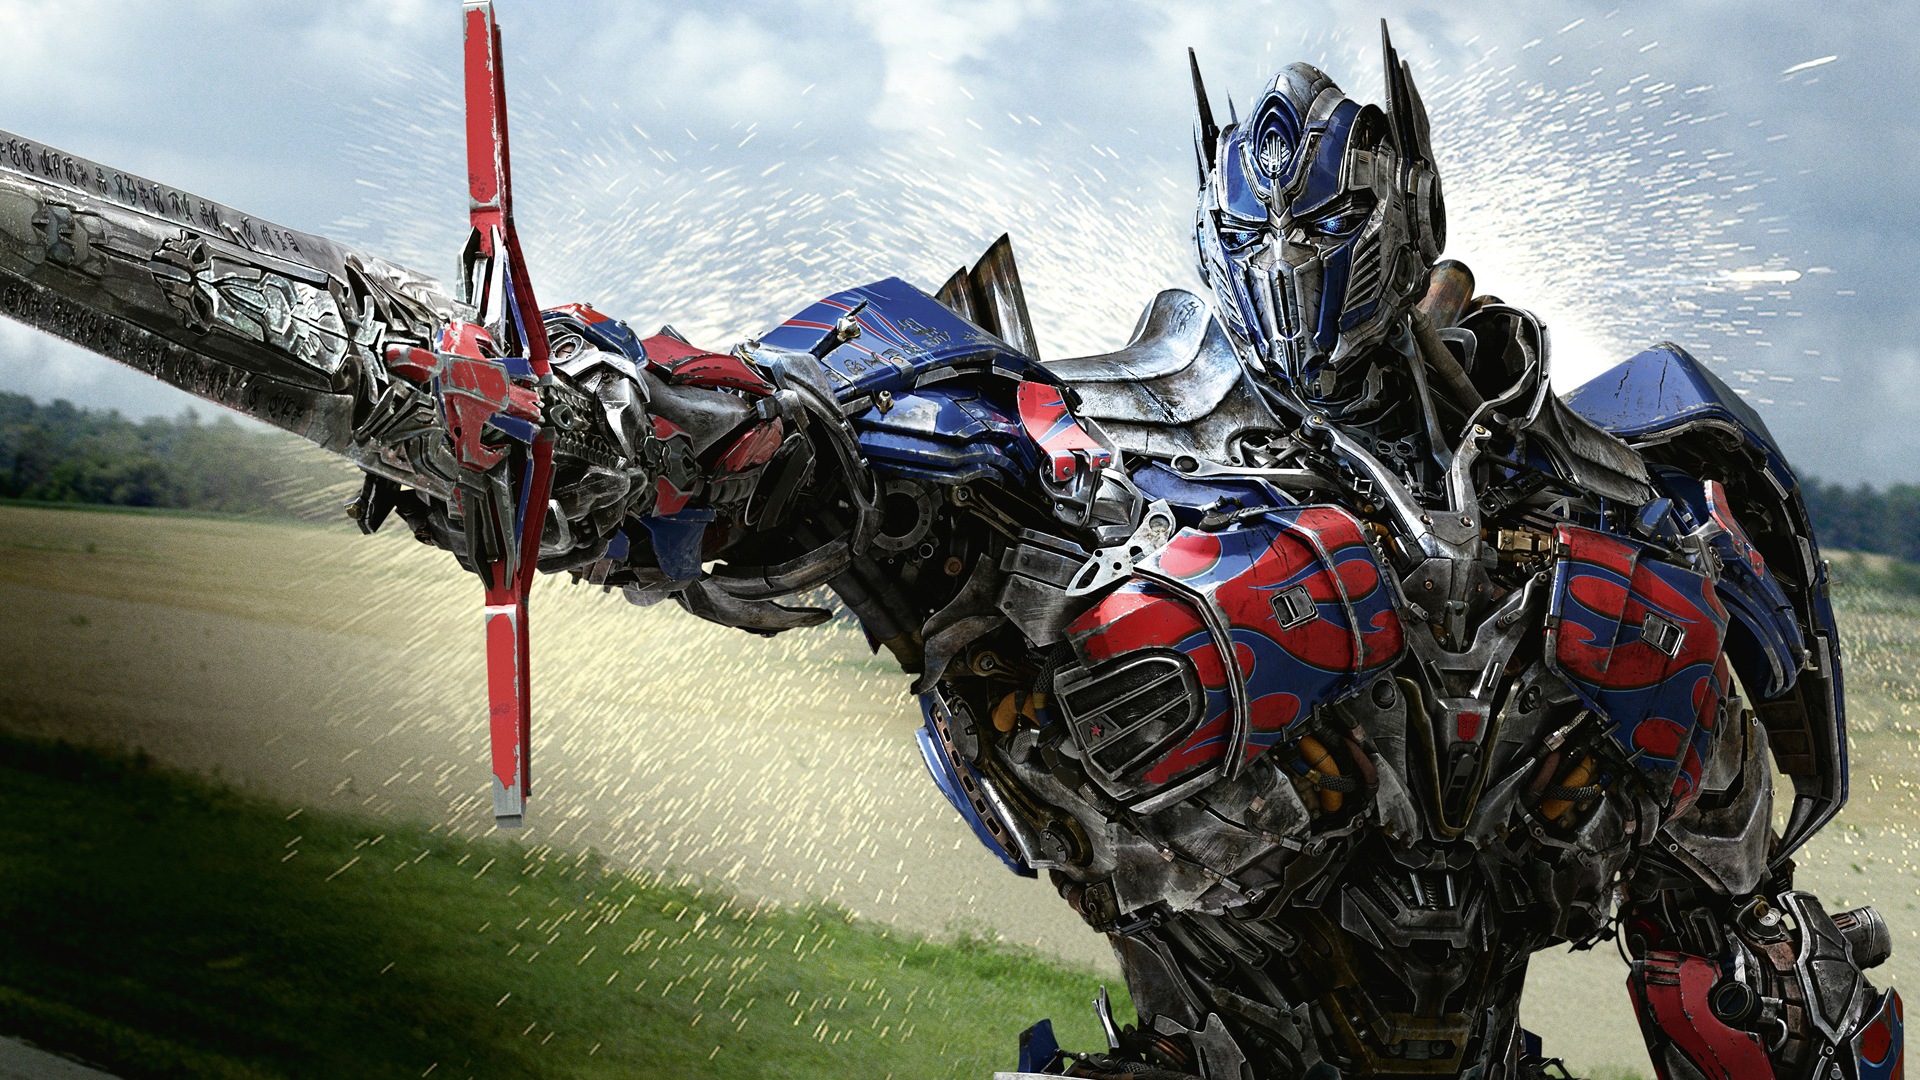 2014 Transformers: Age of Extinction HD tapety #4 - 1920x1080